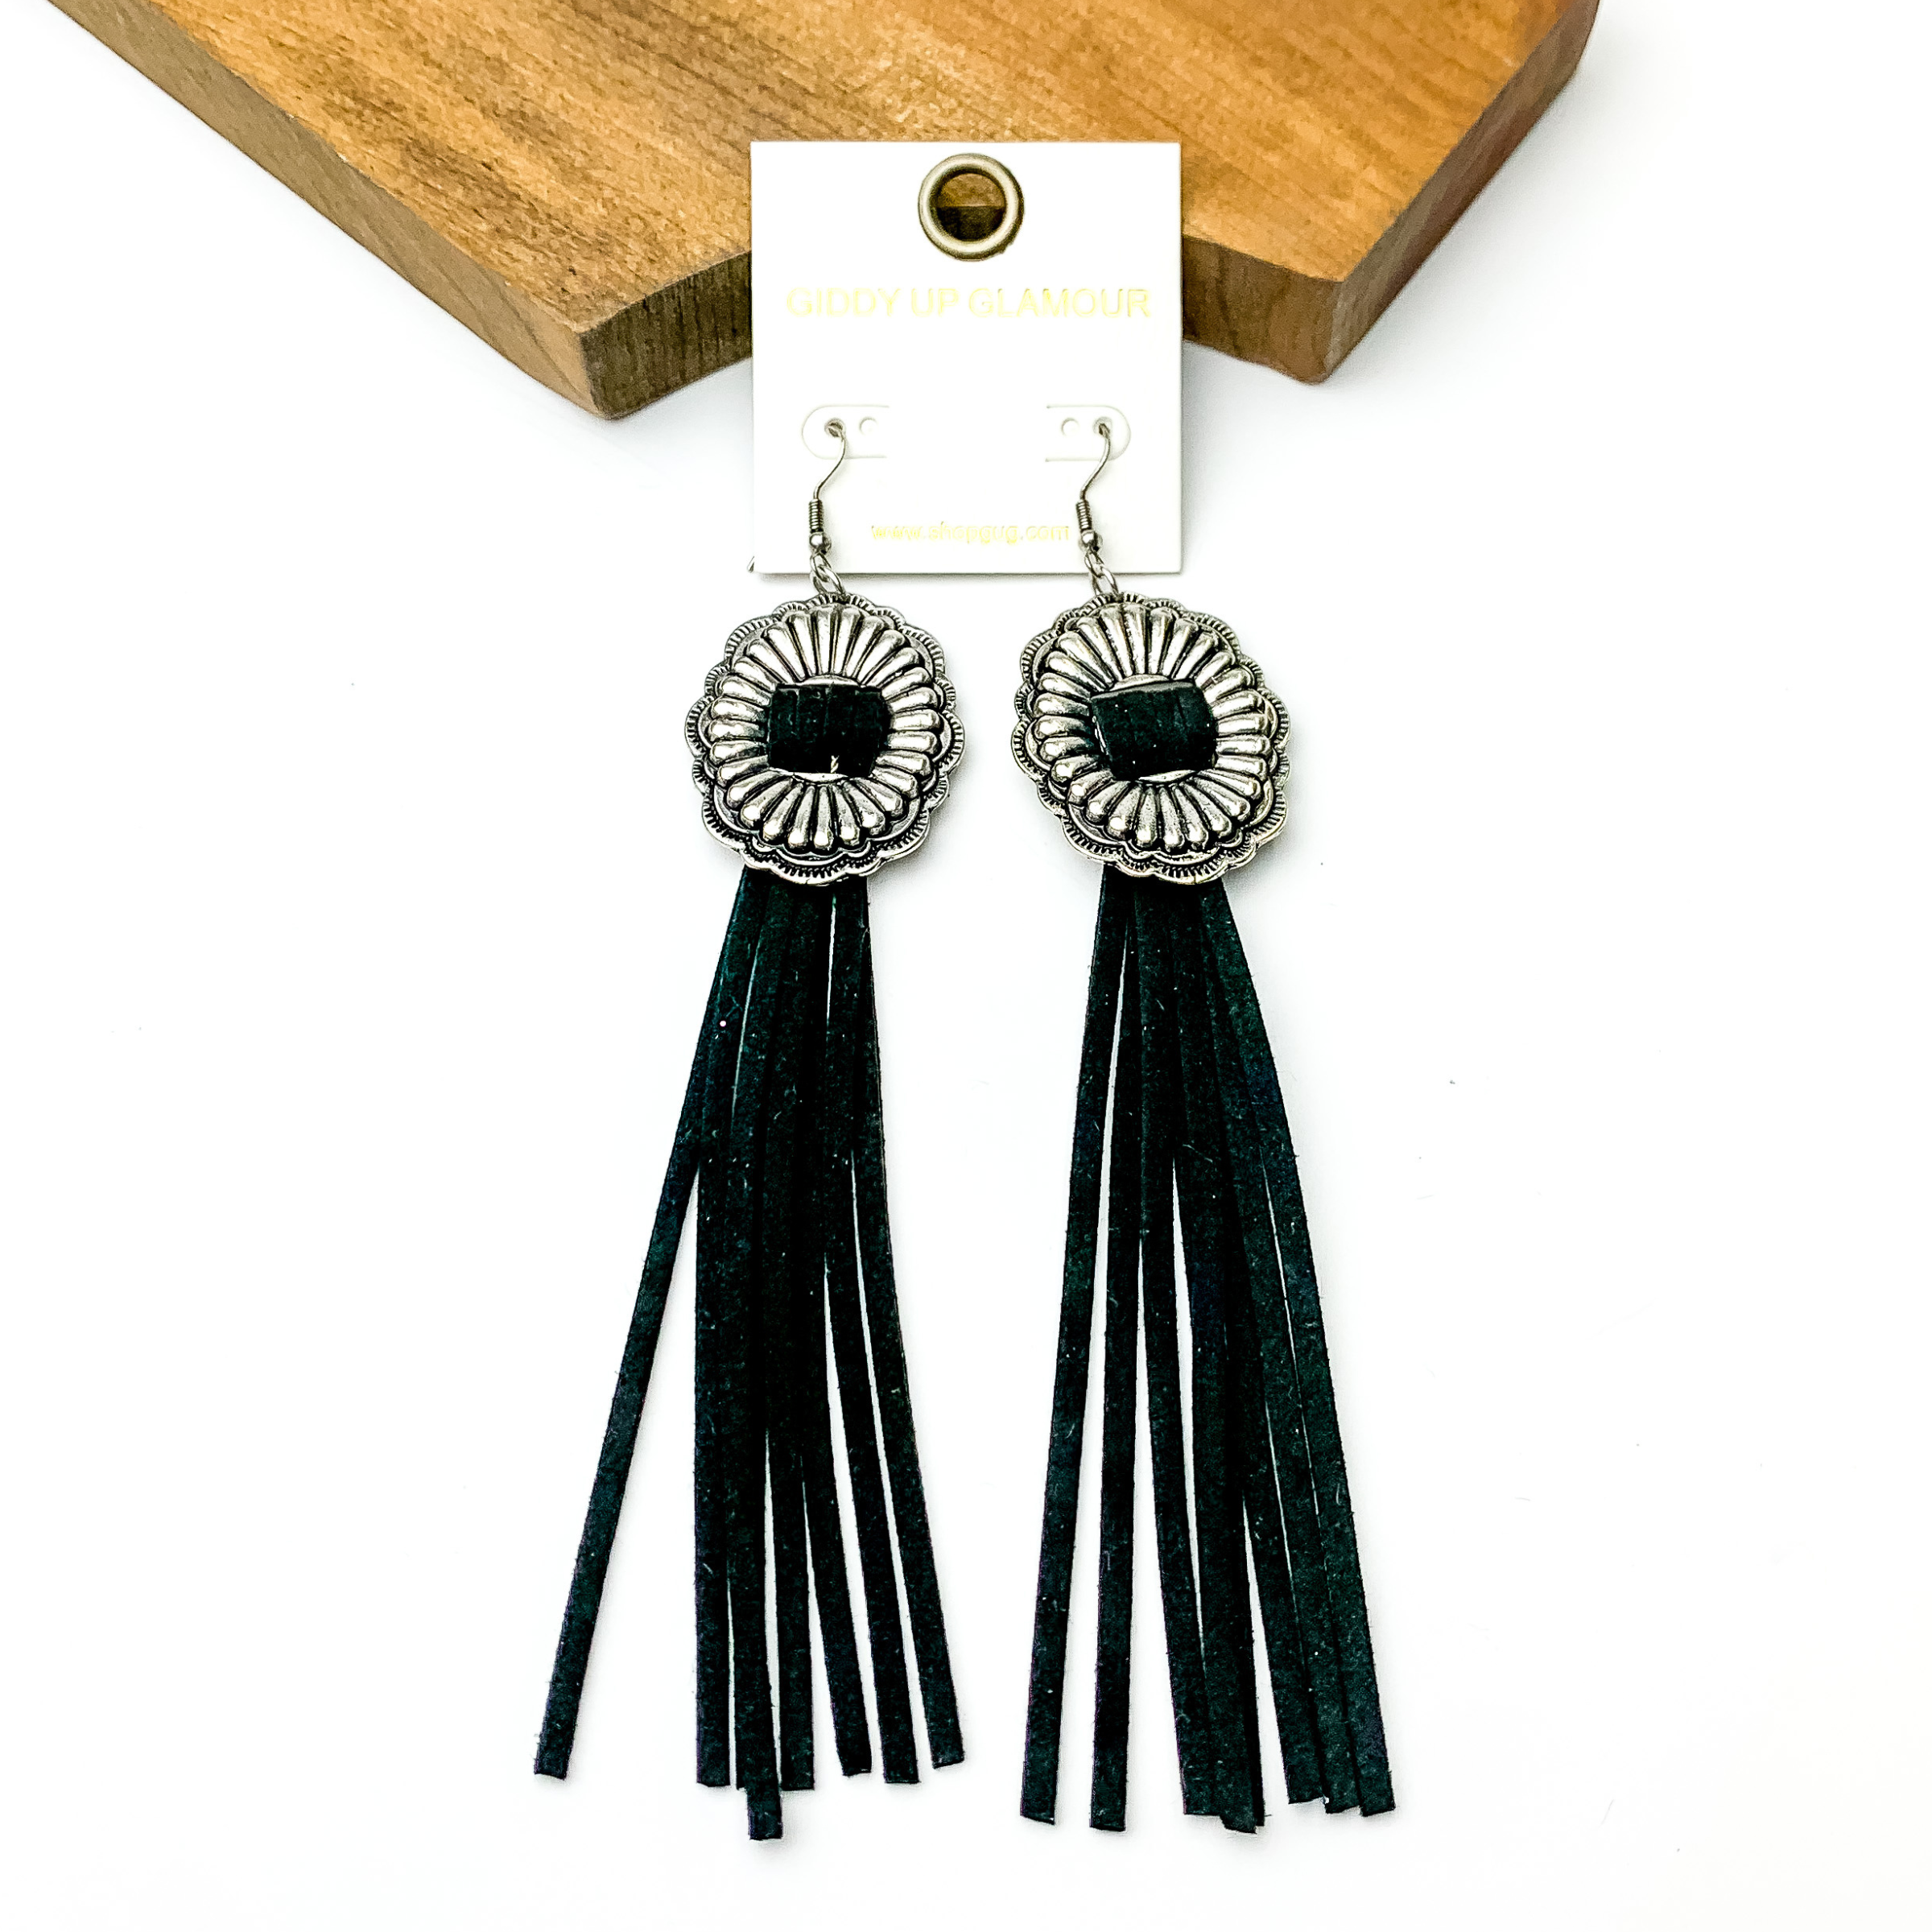 Silver concho dangle earrings with black tassels. These earrings are pictured on a white background with a brown block at the top of the picture. 